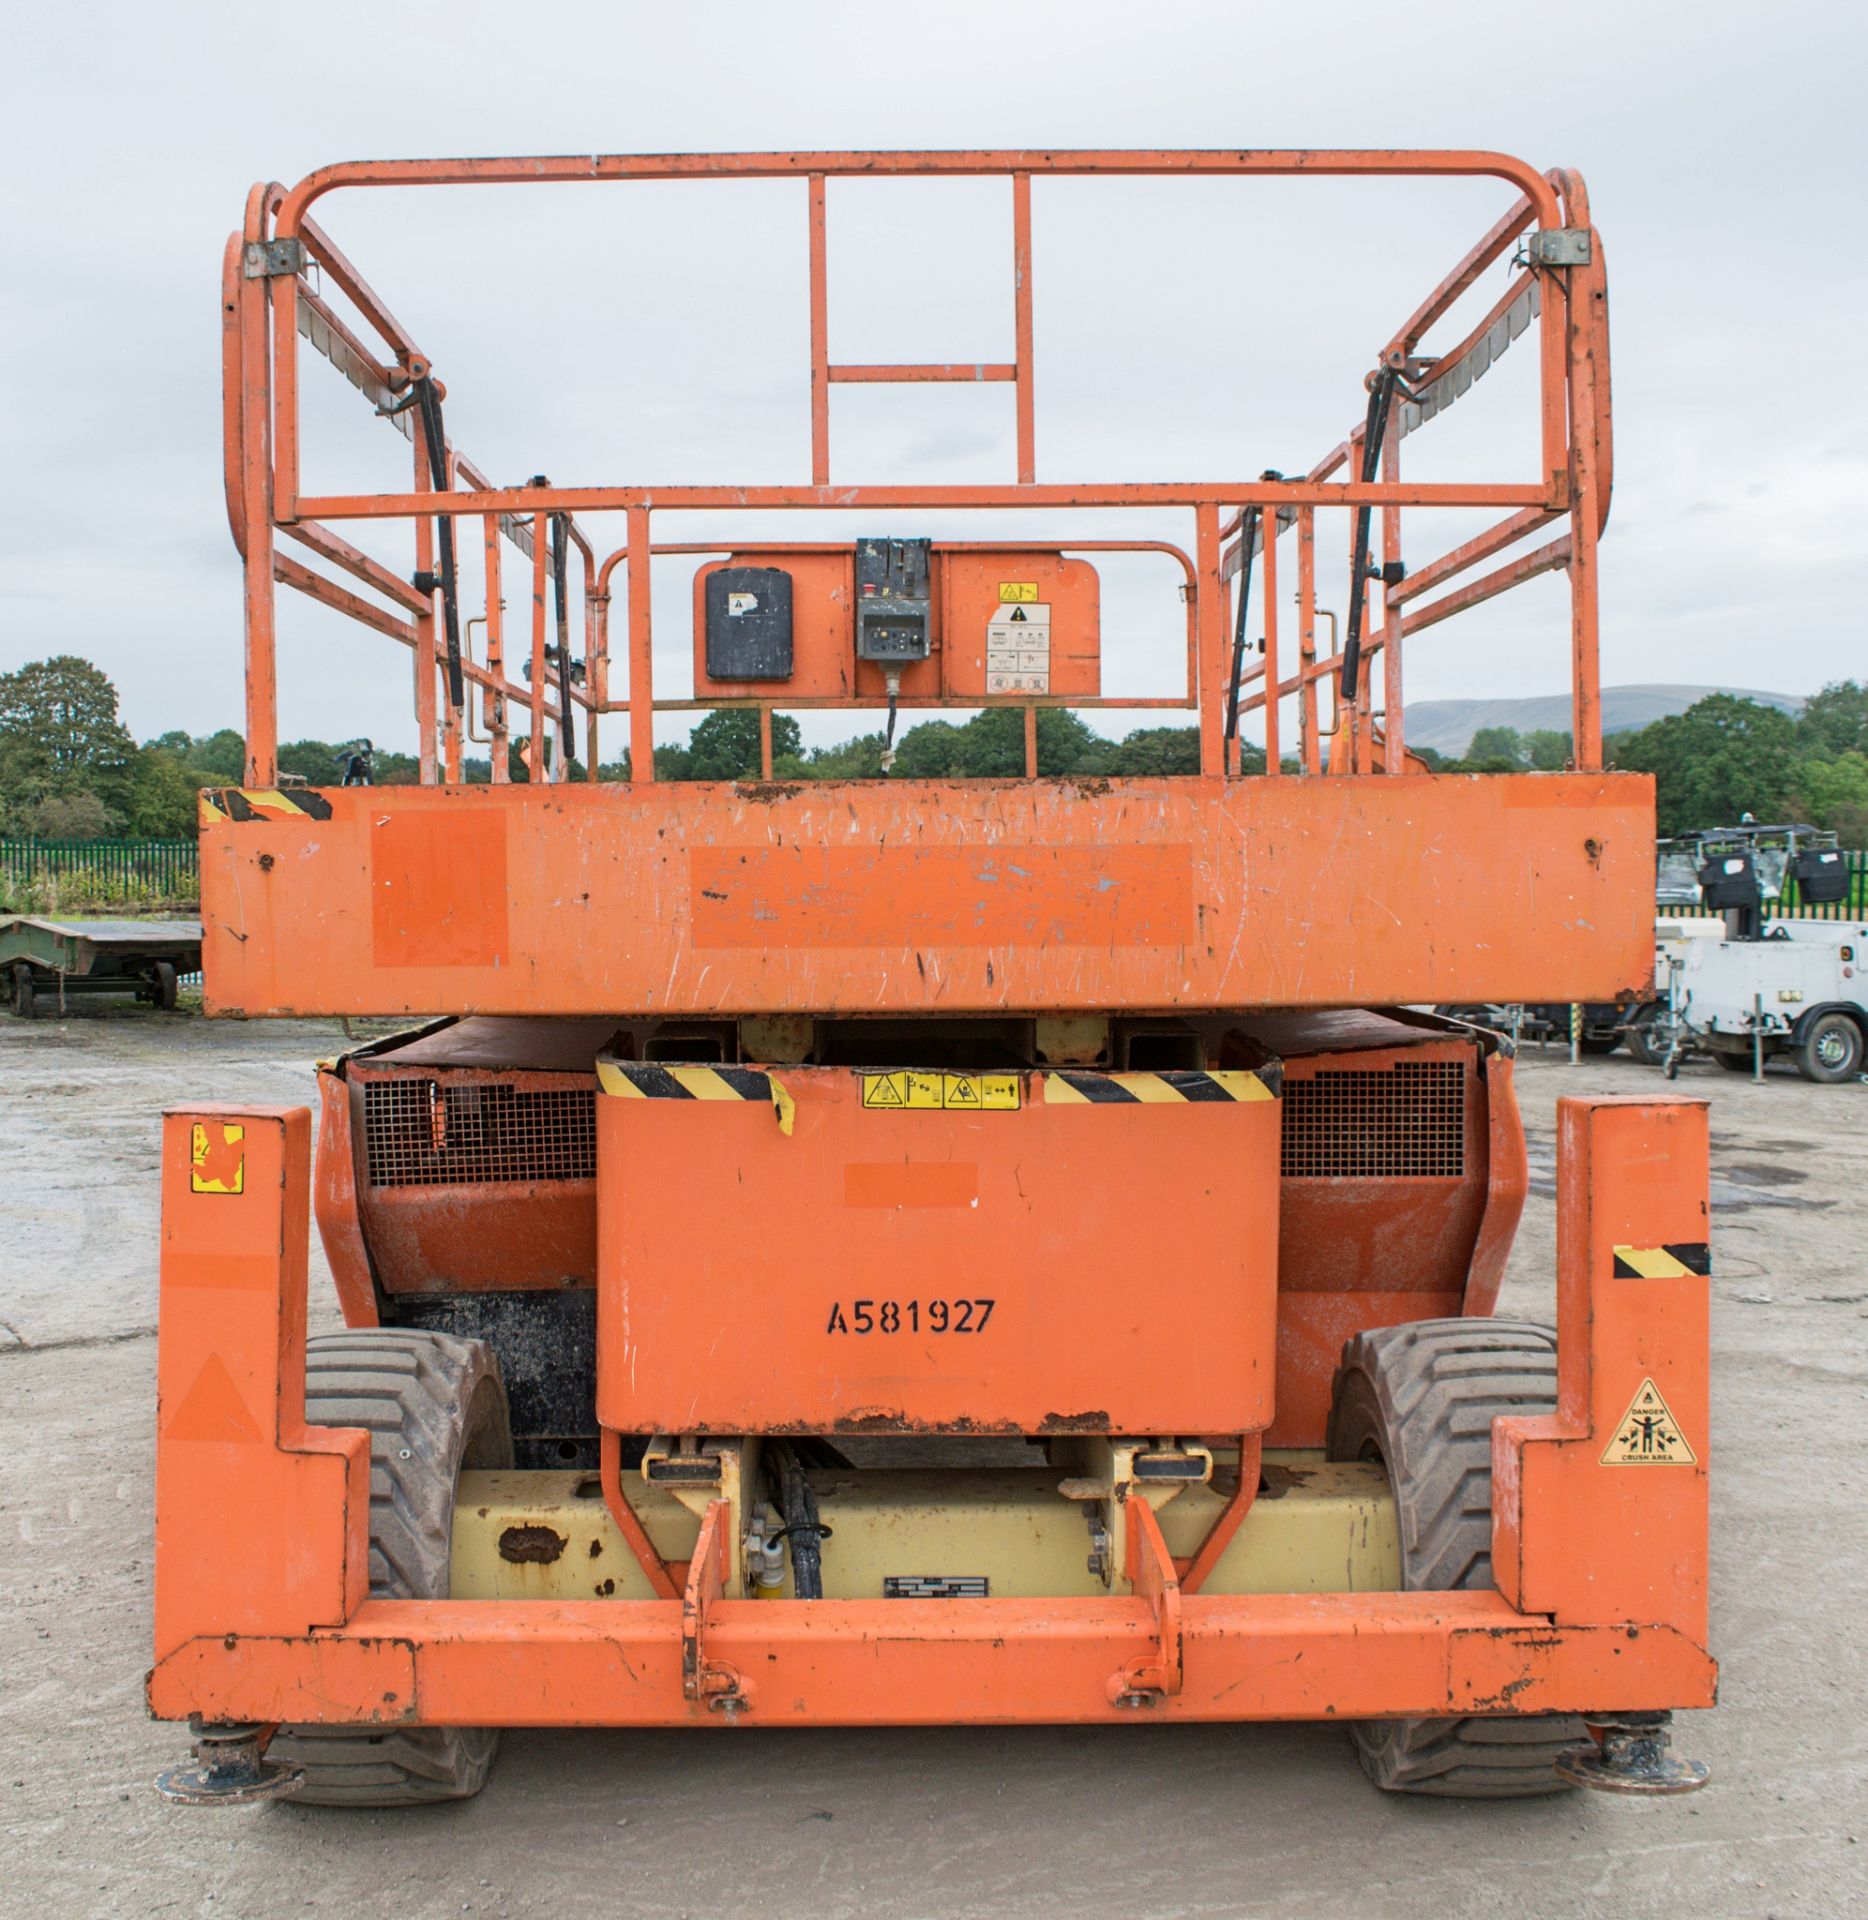 JLG 3594RT diesel driven 4x4 scissor lift Year: 2012 S/N: 210712 Recorded Hours: 641 A581927 - Image 5 of 14